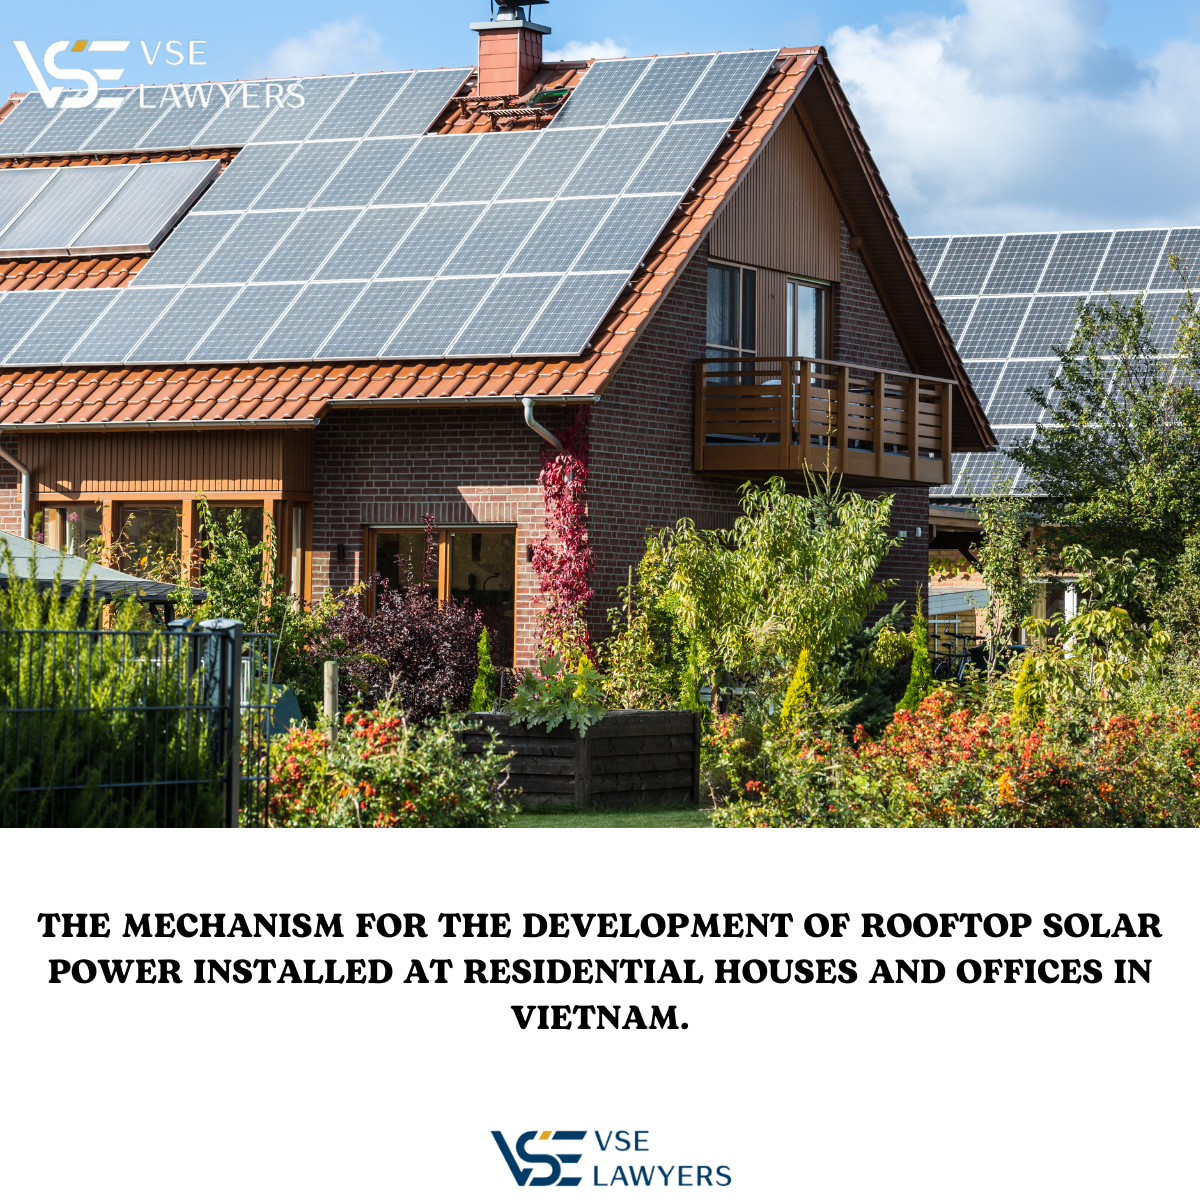 THE MECHANISM FOR THE DEVELOPMENT OF ROOFTOP SOLAR POWER INSTALLED AT RESIDENTIAL HOUSES AND OFFICES IN VIETNAM.